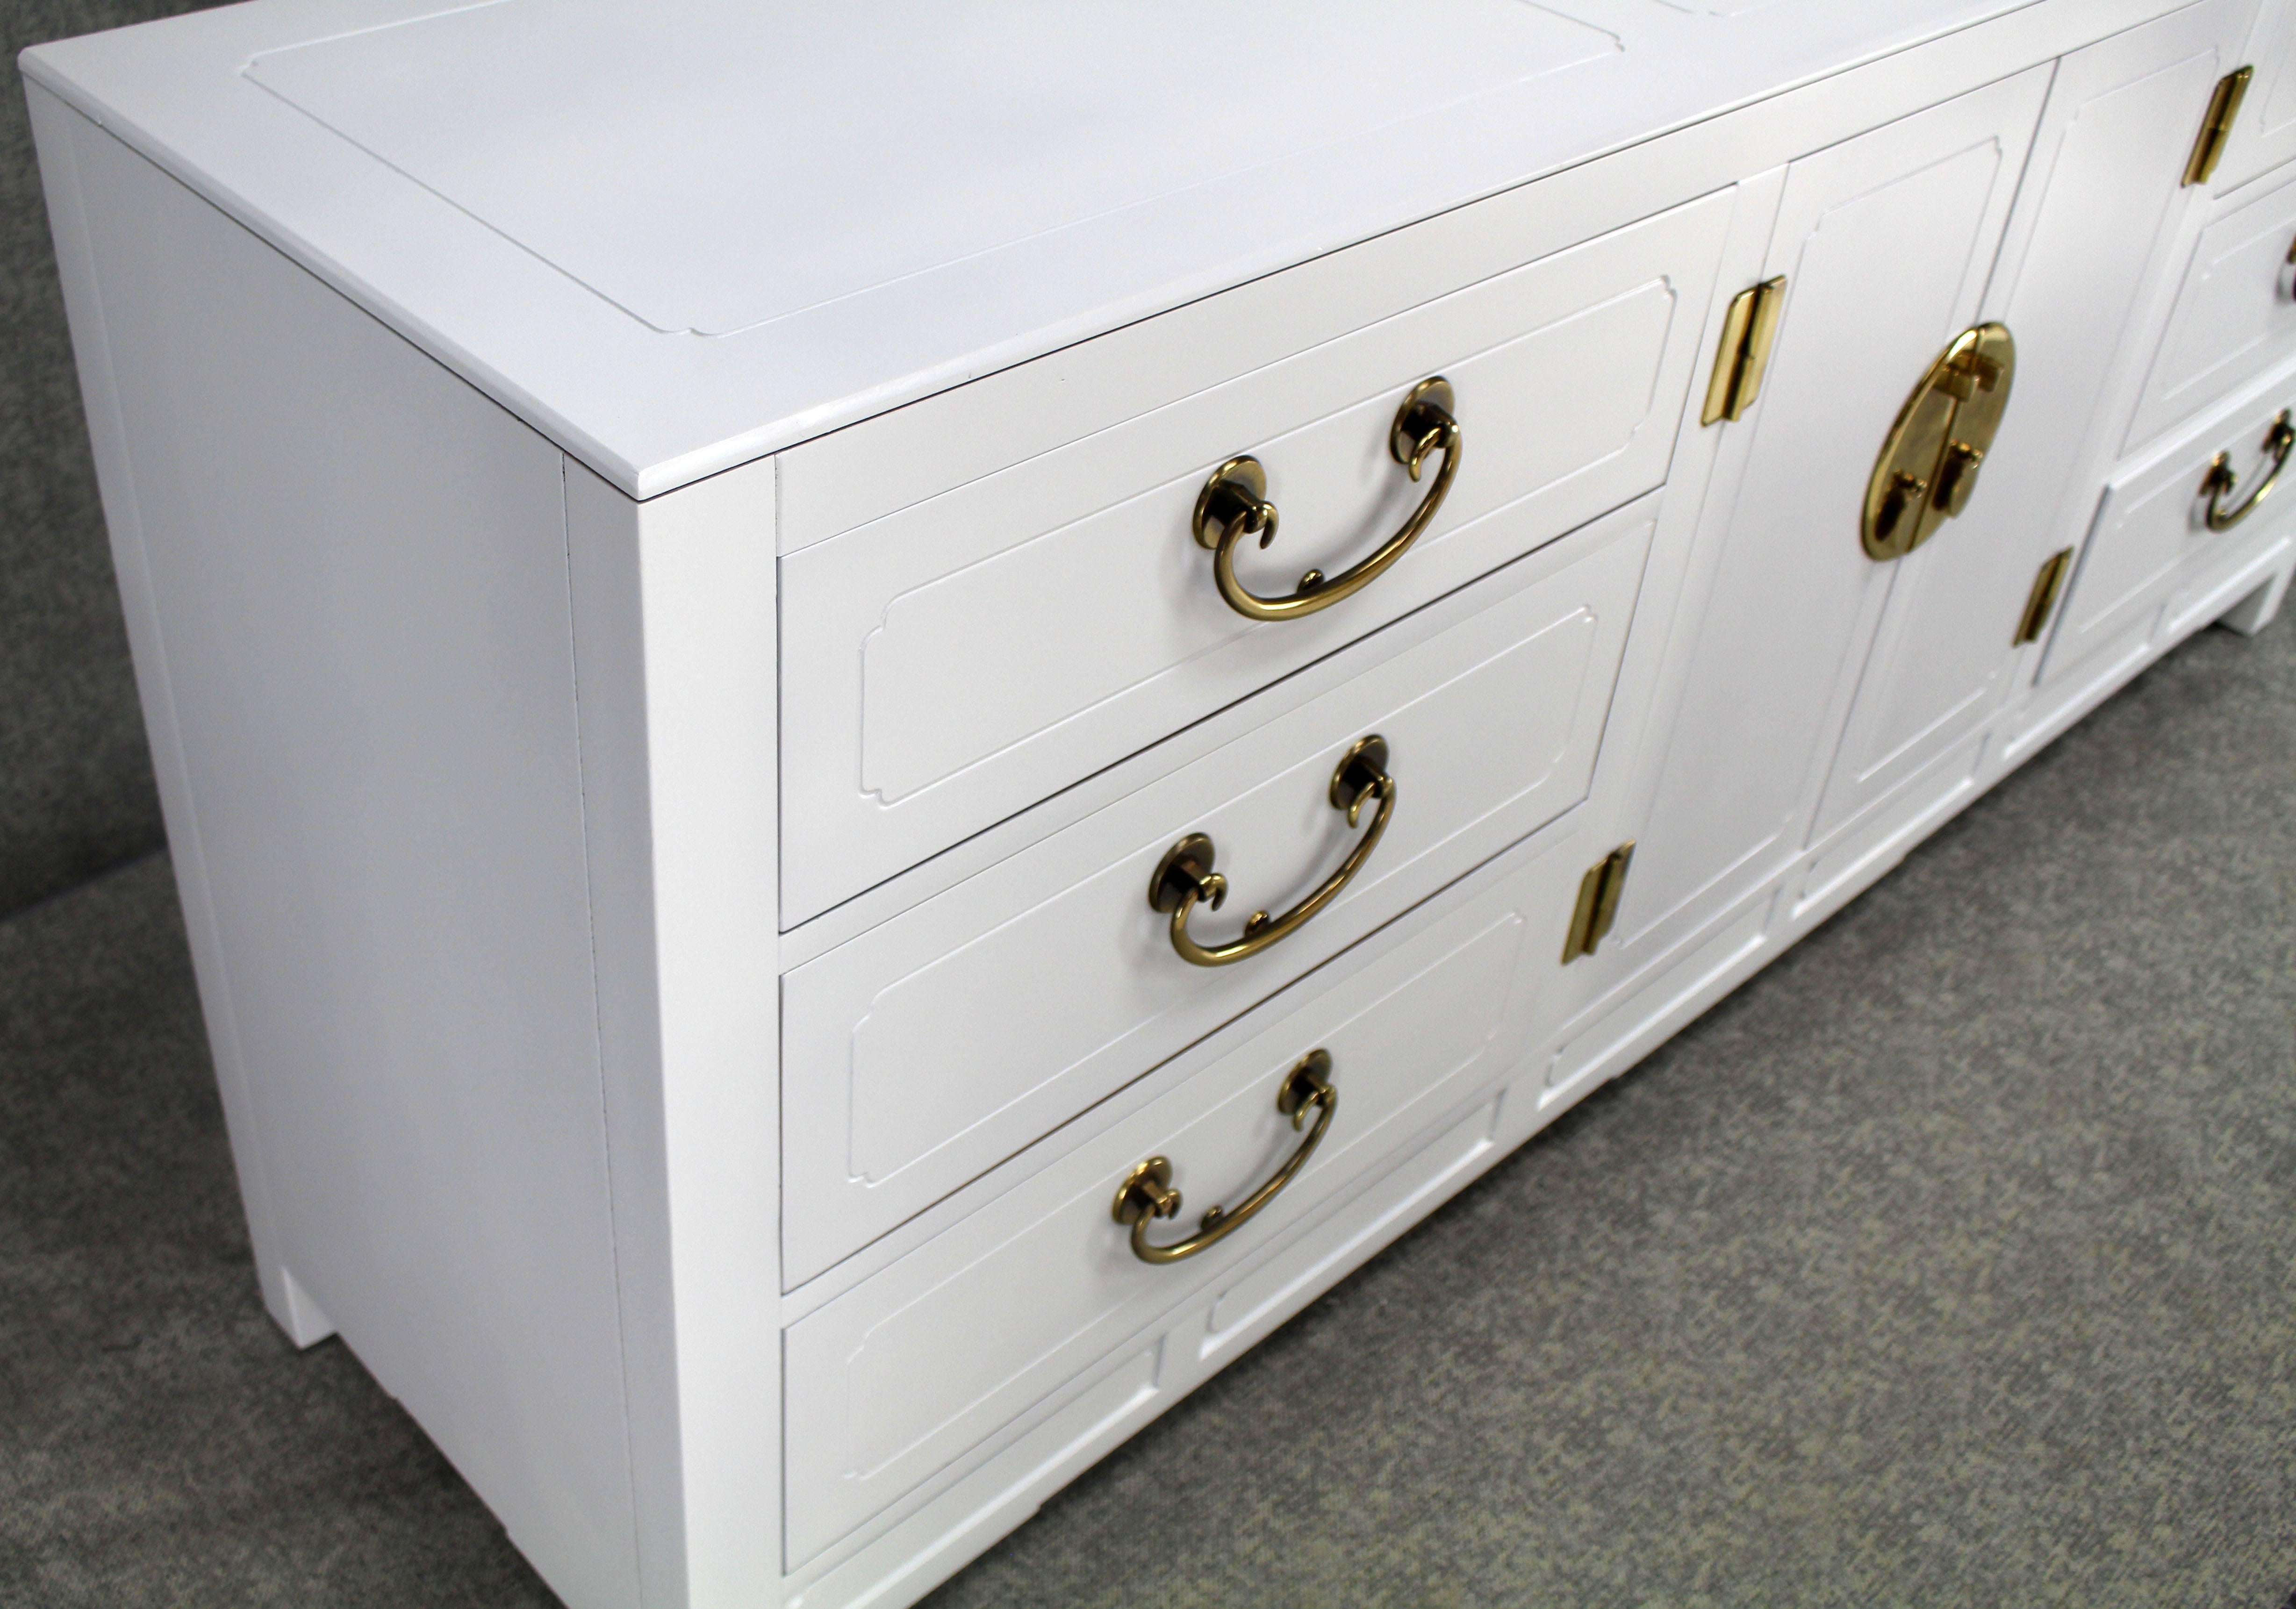 Lacquered Lacquer Brass Hardware Mid-Century Modern Long Credenza Dresser Nine Drawers For Sale